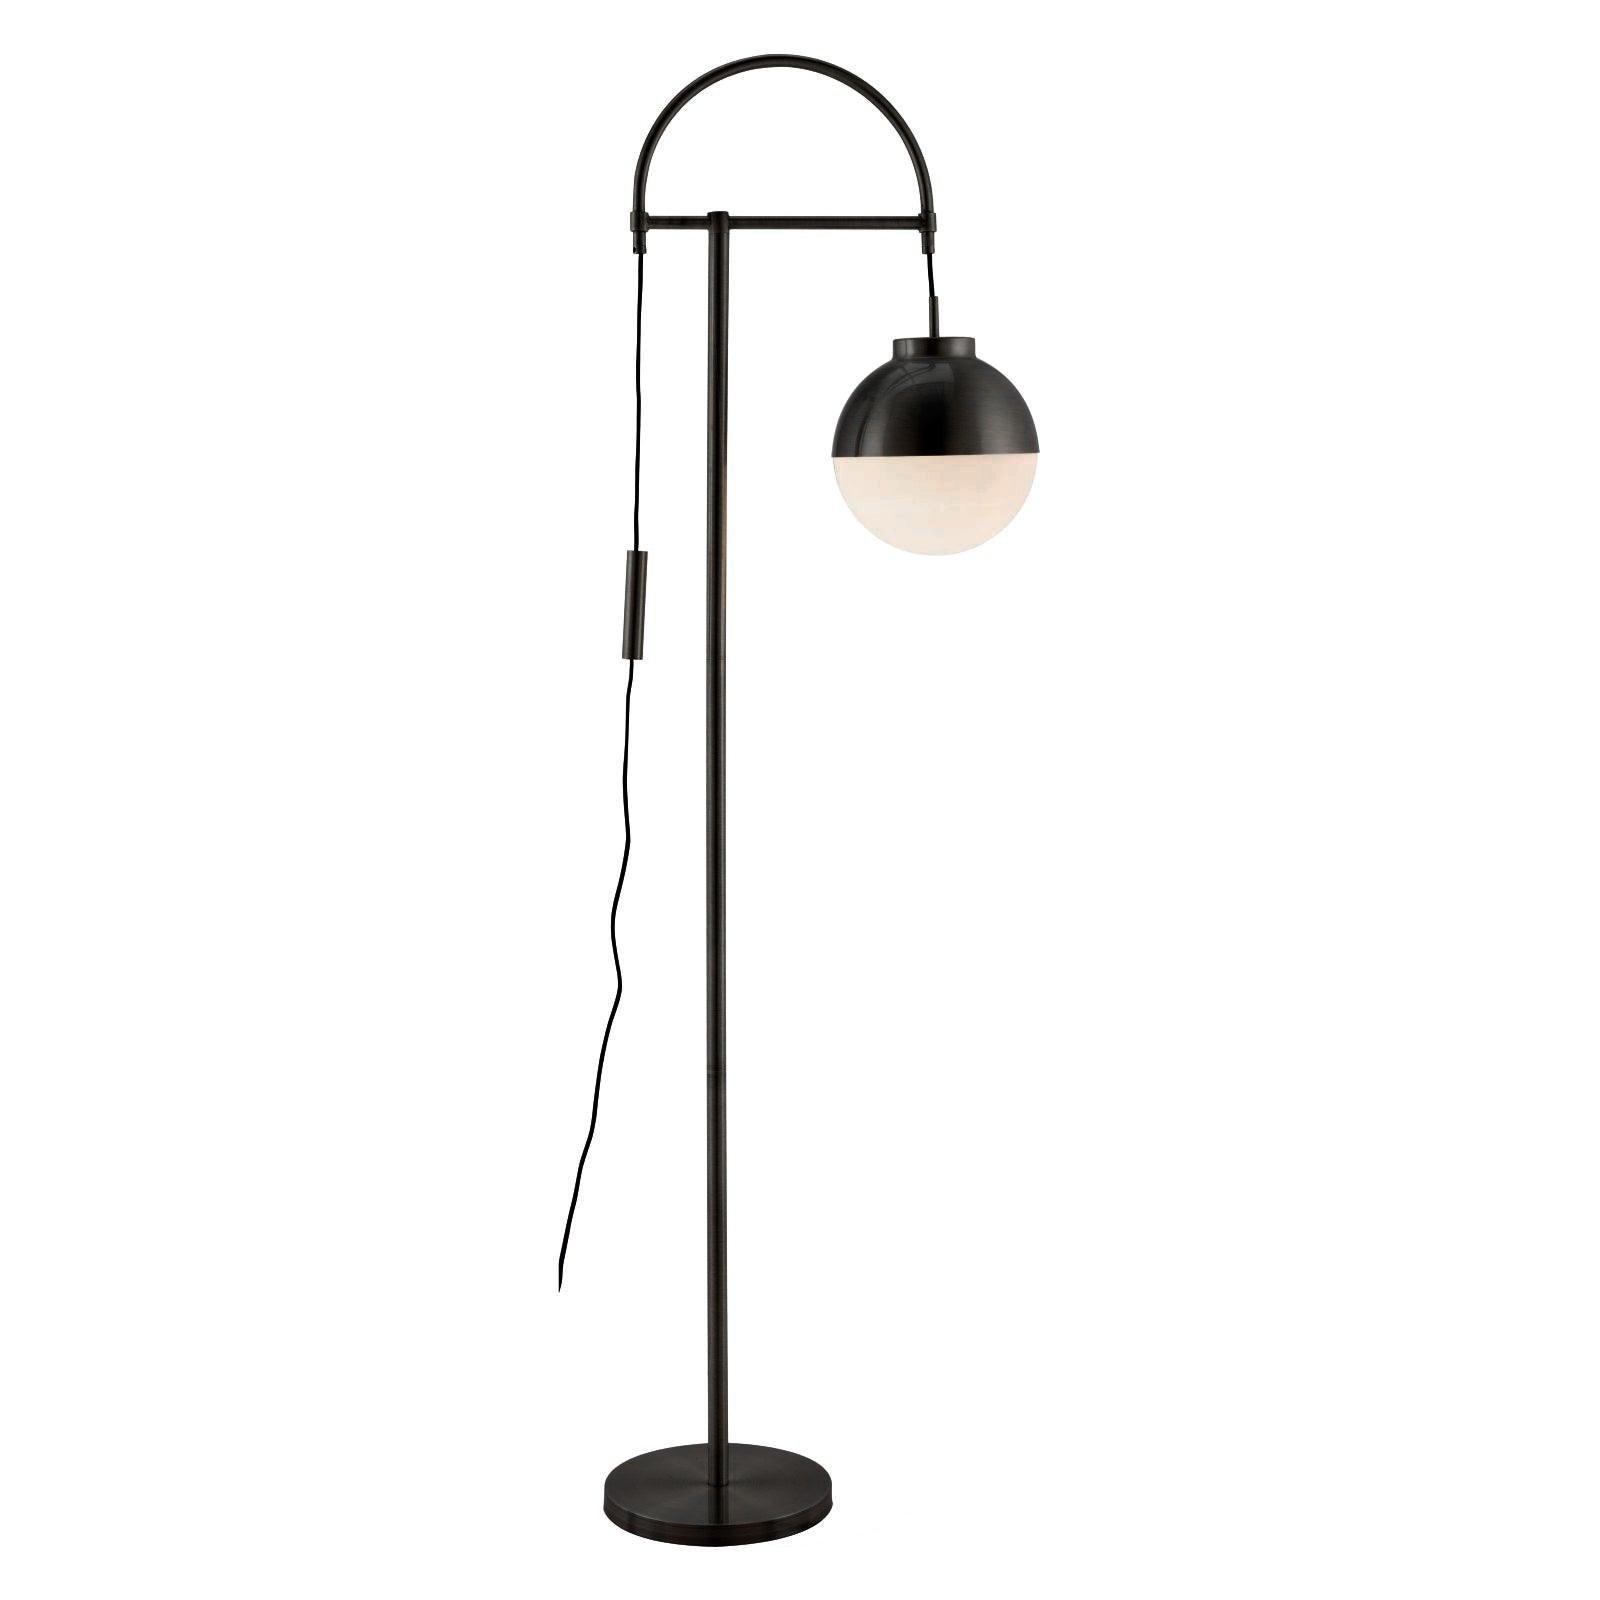 Black Waterloo Floor Lamp with a diameter of 15.7 inches and a height of 65 inches (40cm x 165cm), suitable for EU outlets.